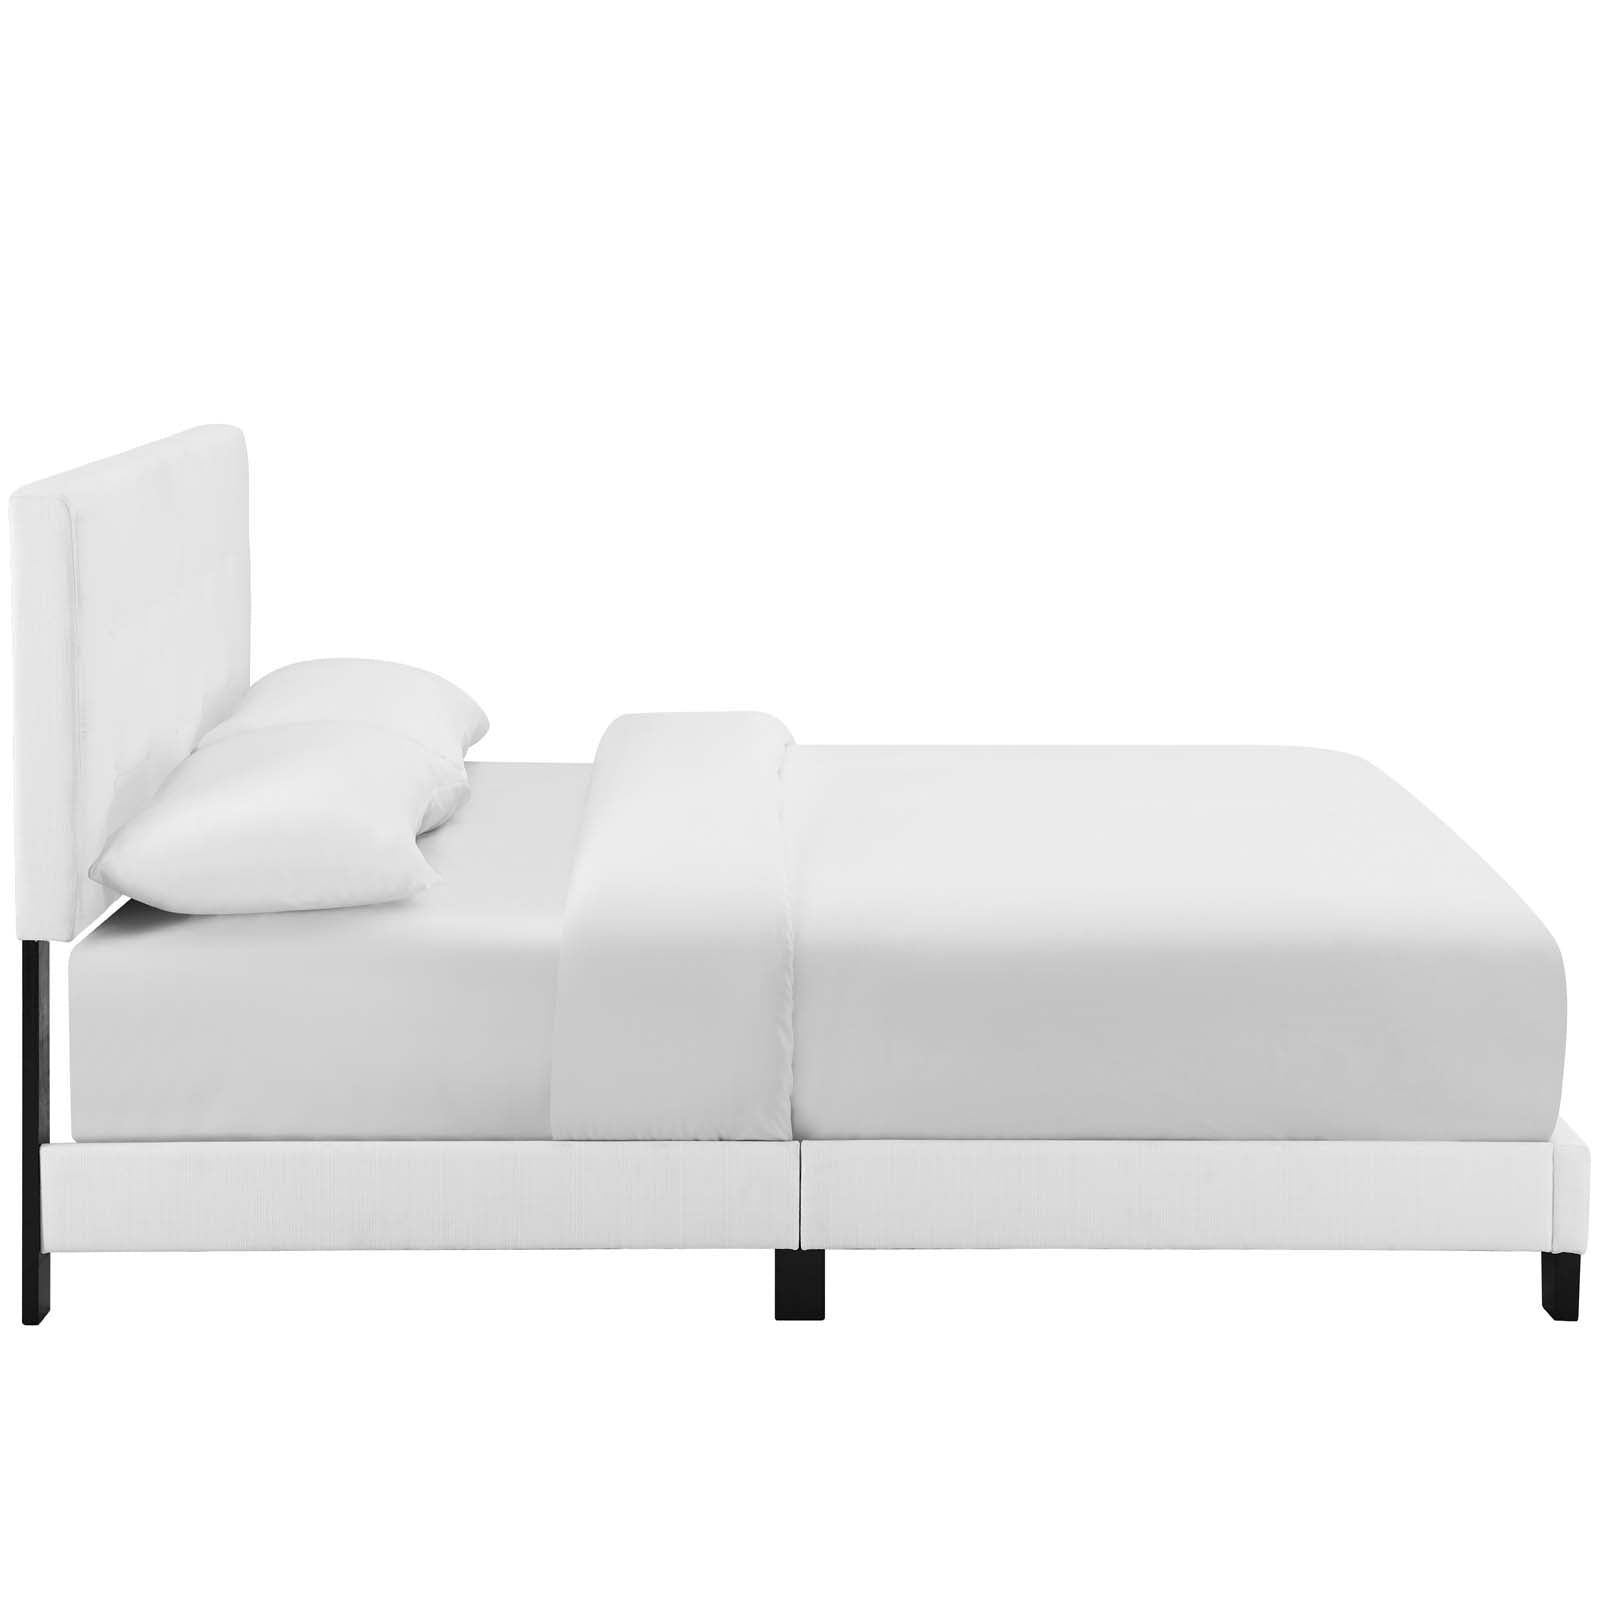 Modway Beds - Amira Queen Upholstered Fabric Bed White